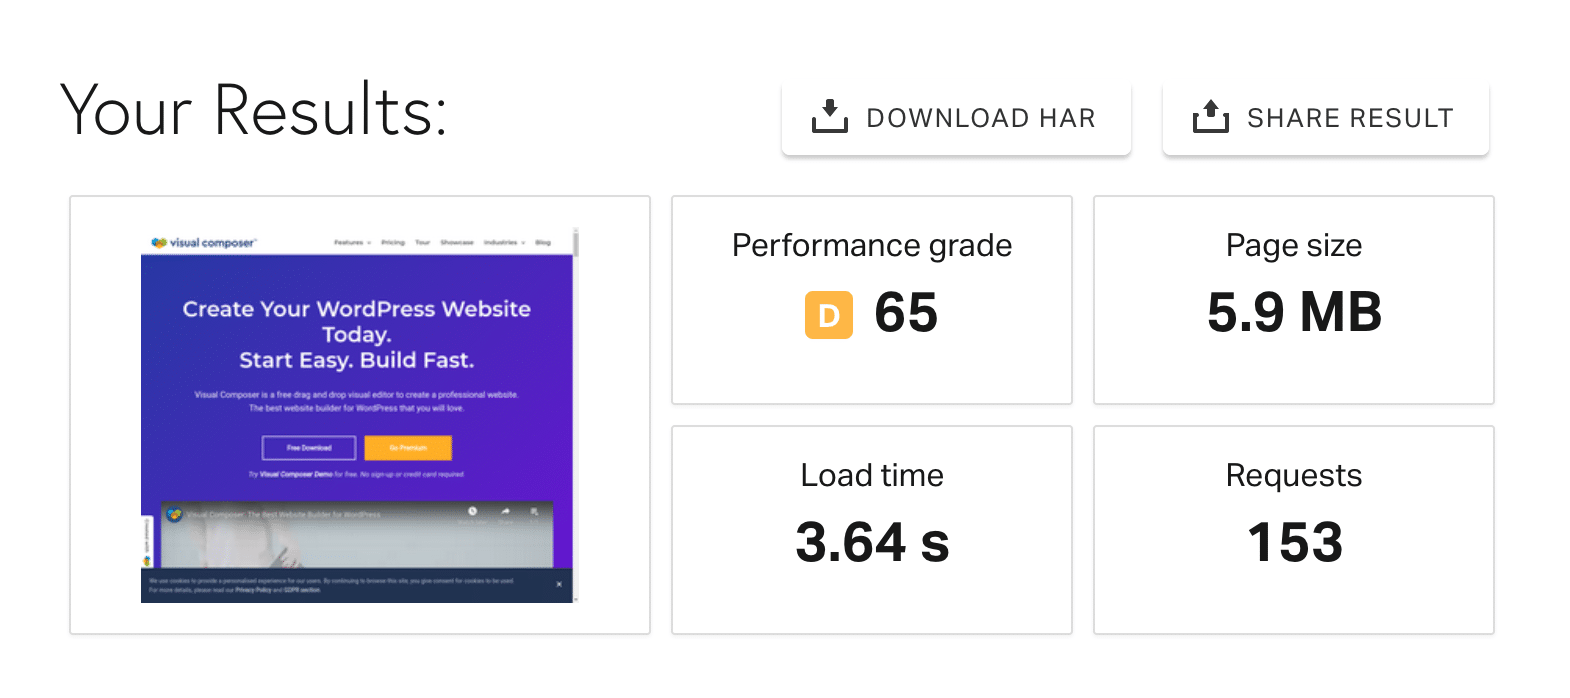 Pingdom Tools speed test results for Visual Composer.